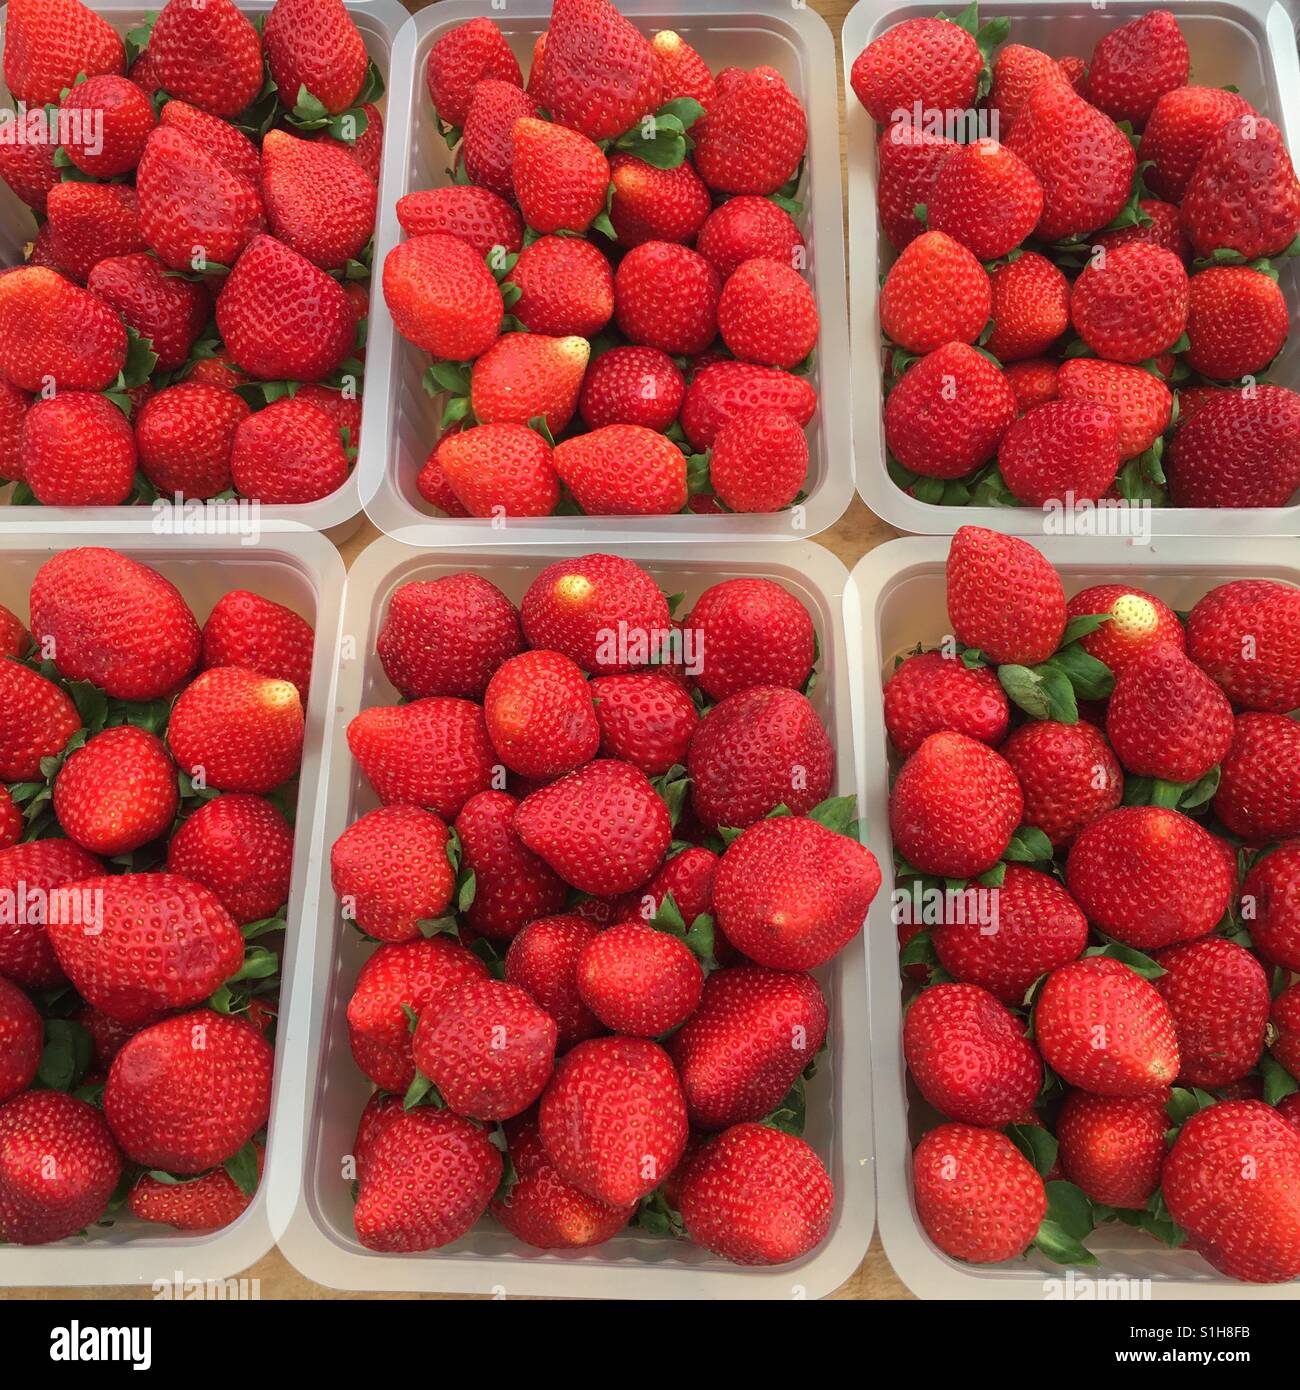 Punnets of strawberries at a market in Mallorca Stock Photo